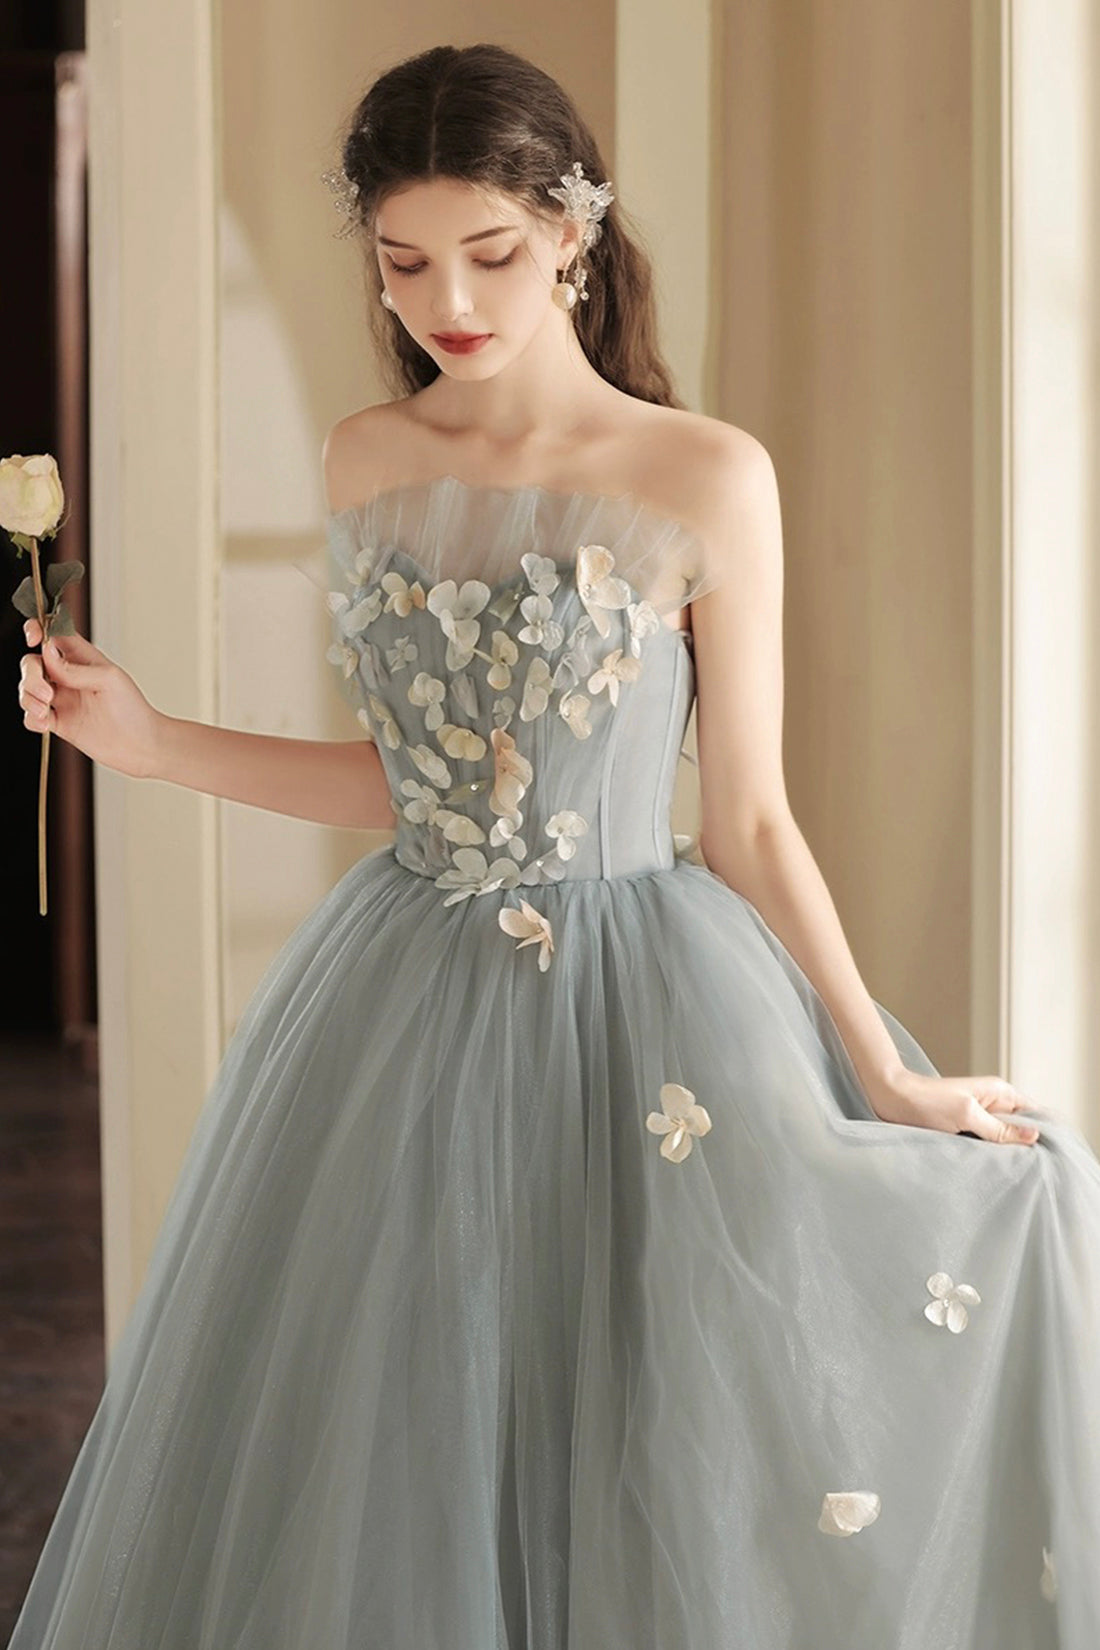 A-Line Gray Tulle Strapless Floor Length Prom Dress, Beautiful Backless Evening Party Dres with Flowers